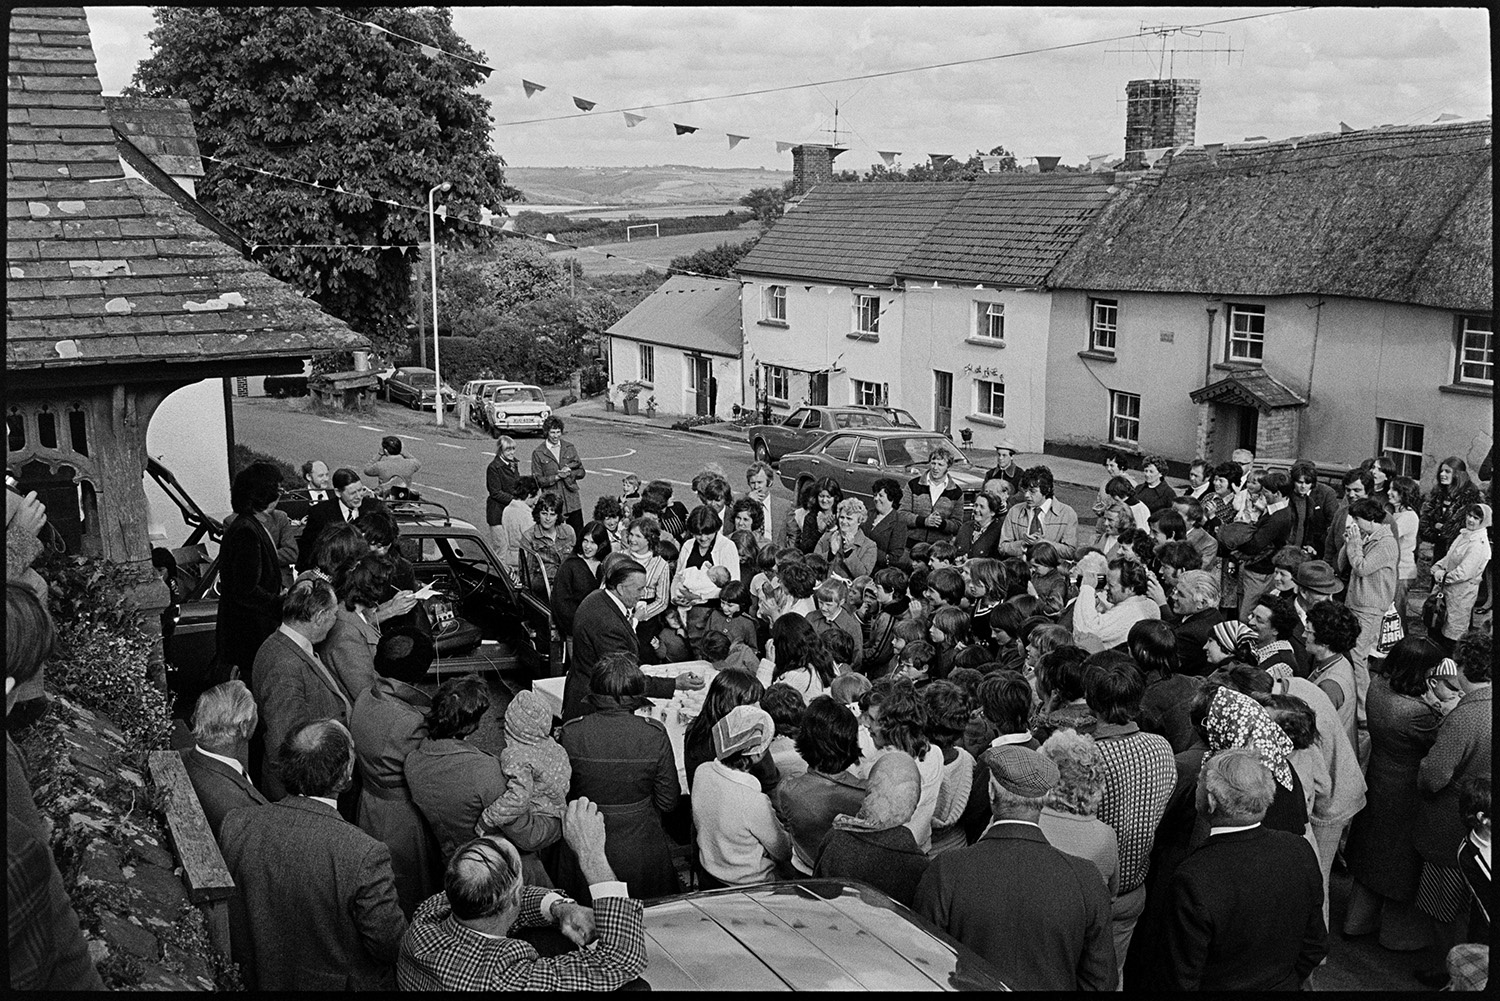 Presentation of Jubilee mugs, crowd in front of mugs set out on table, man presenting them.
[A man presenting mugs to children in Atherington, to celebrate the Silver Jubilee of Queen Elizabeth II. A crowd of men and women are watching. The village square is decorated with bunting, with thatched cottages in the background.]